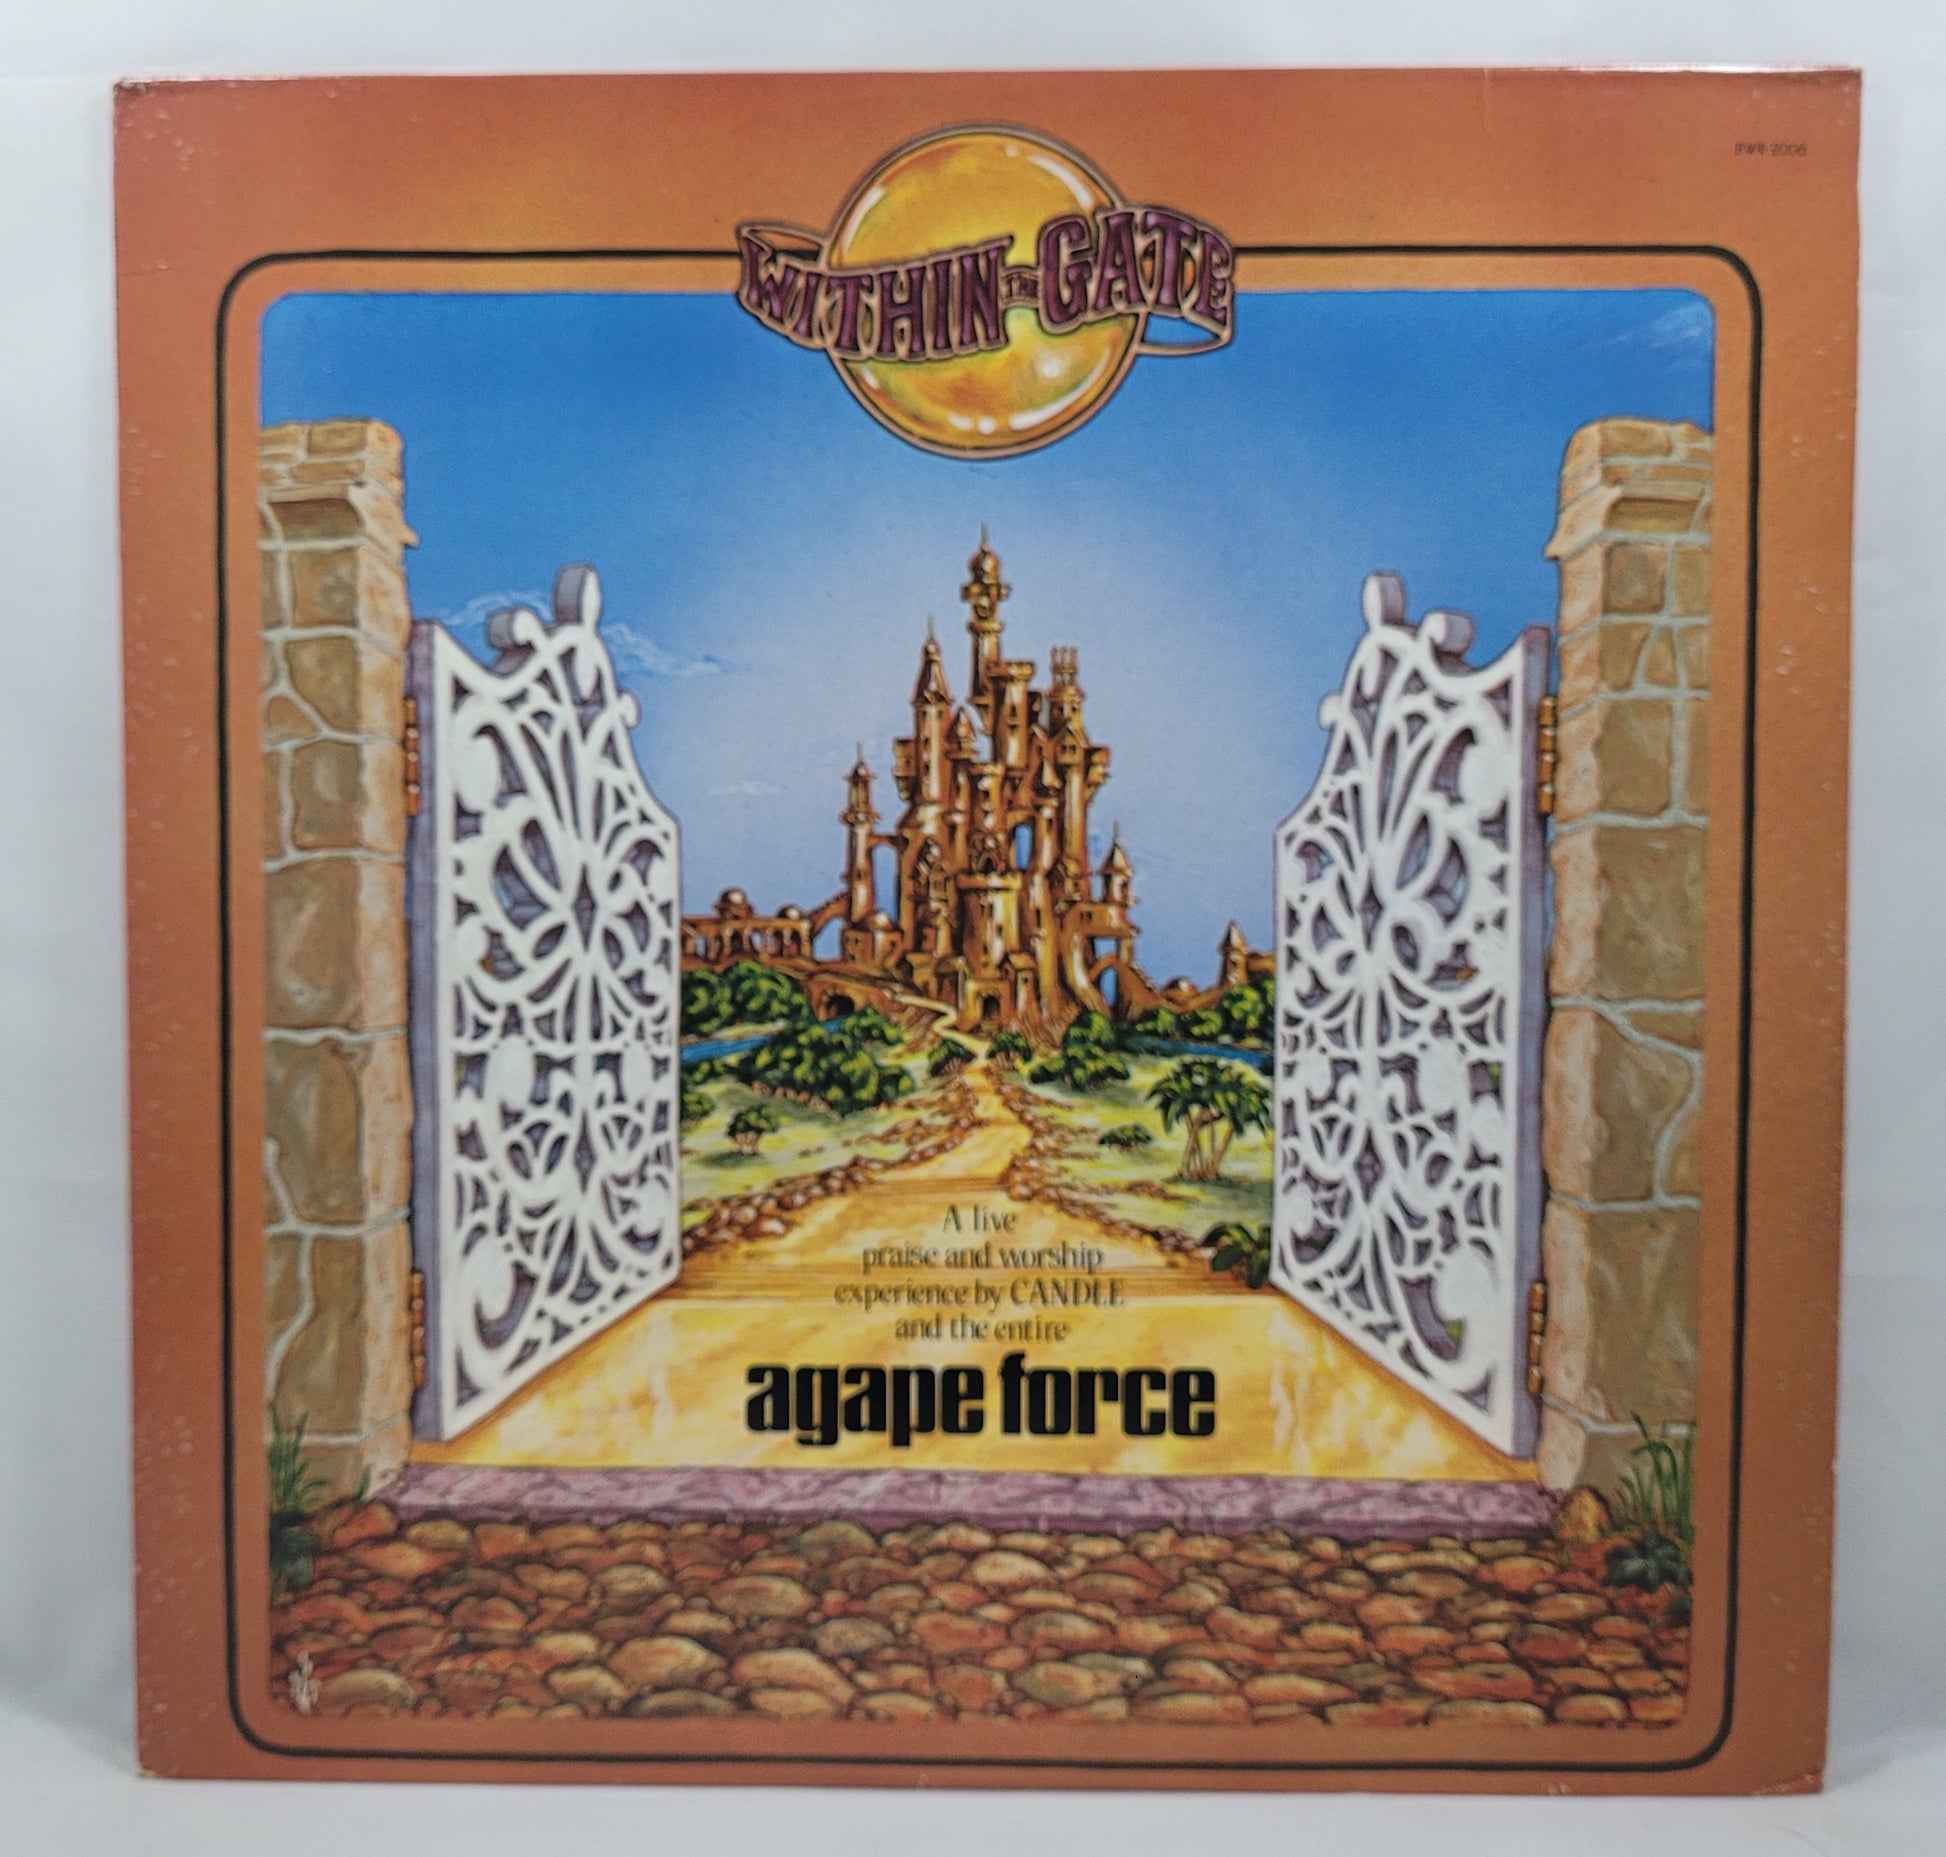 Candle and The Entire Agape Force - Within the Gate [1978 Used Vinyl Record LP]